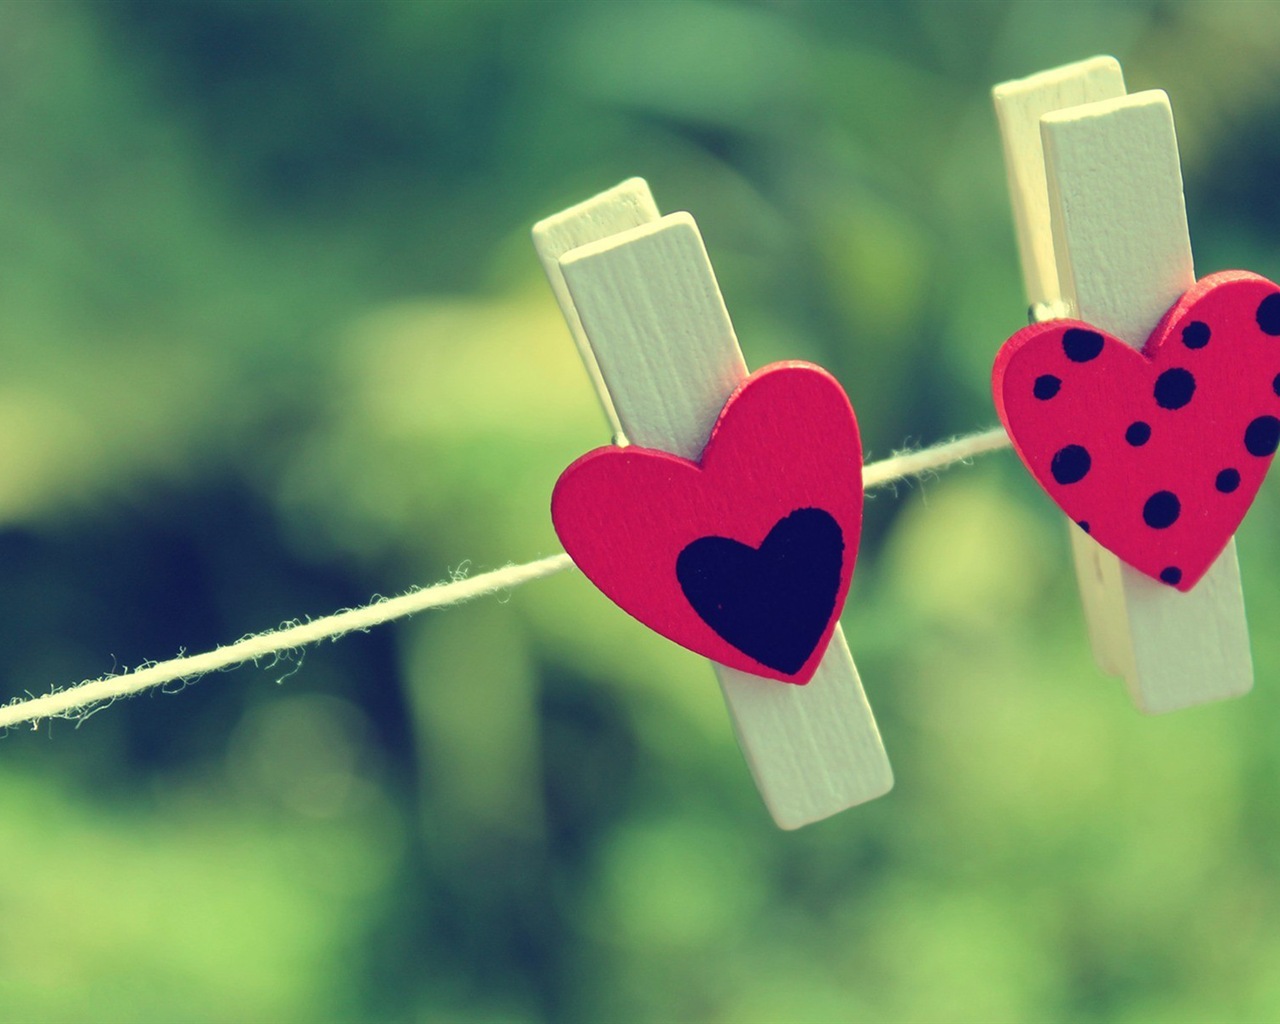 The theme of love, creative heart-shaped HD wallpapers #18 - 1280x1024